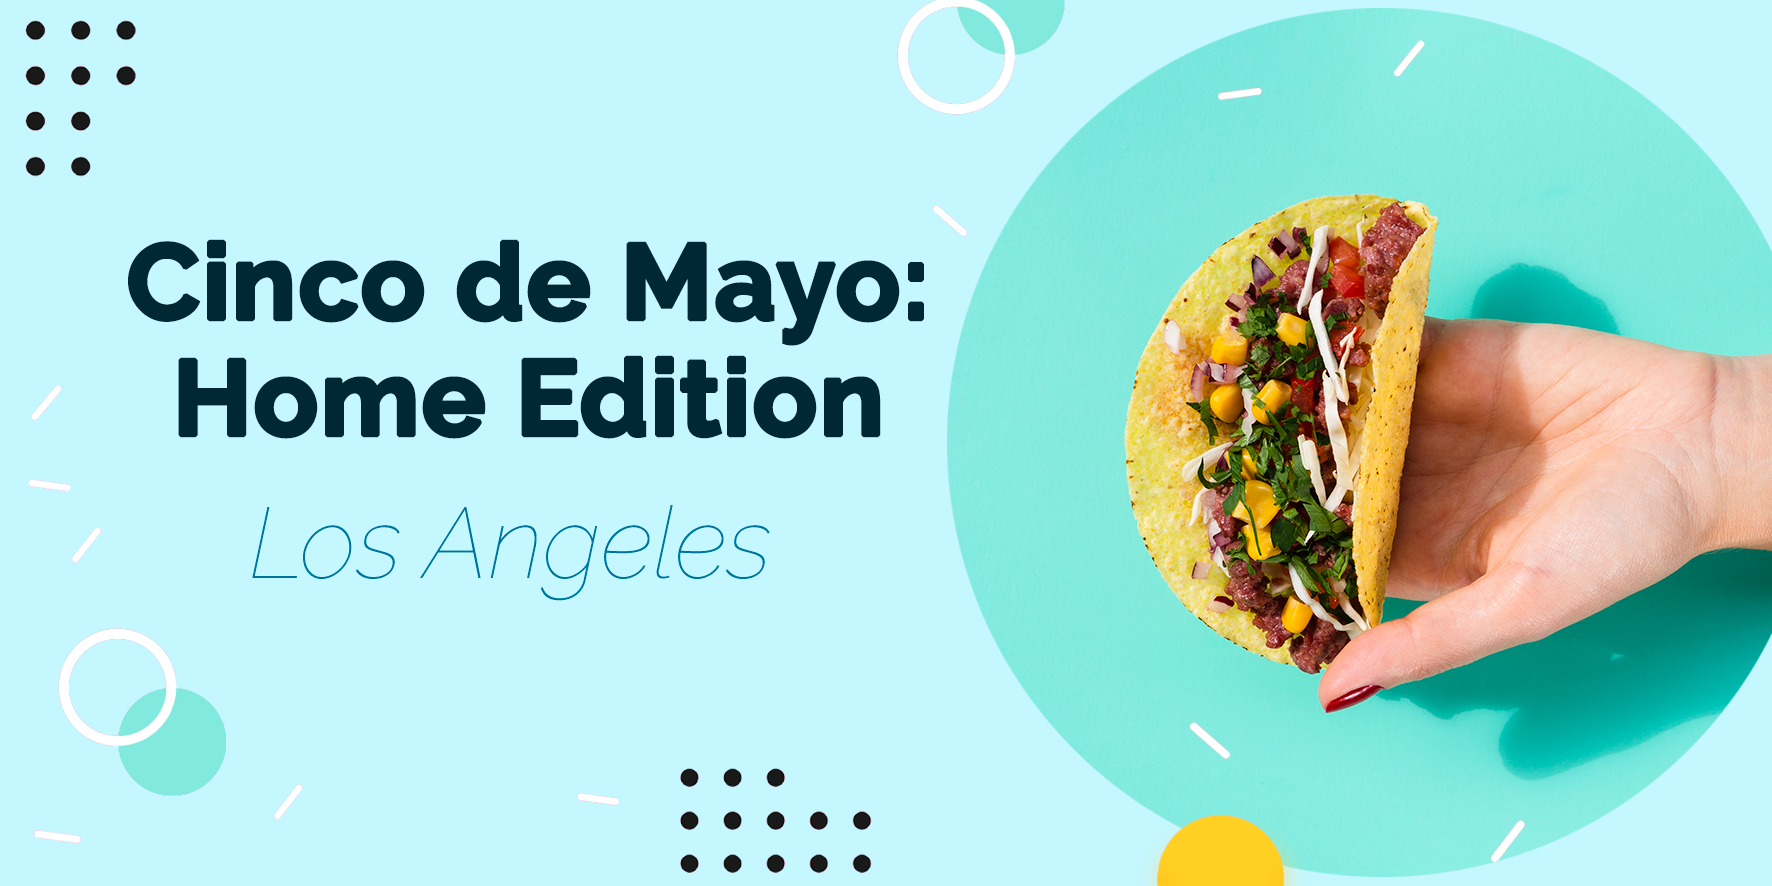 Awesome Options to Celebrate Cinco de Mayo at Home in Los Angeles